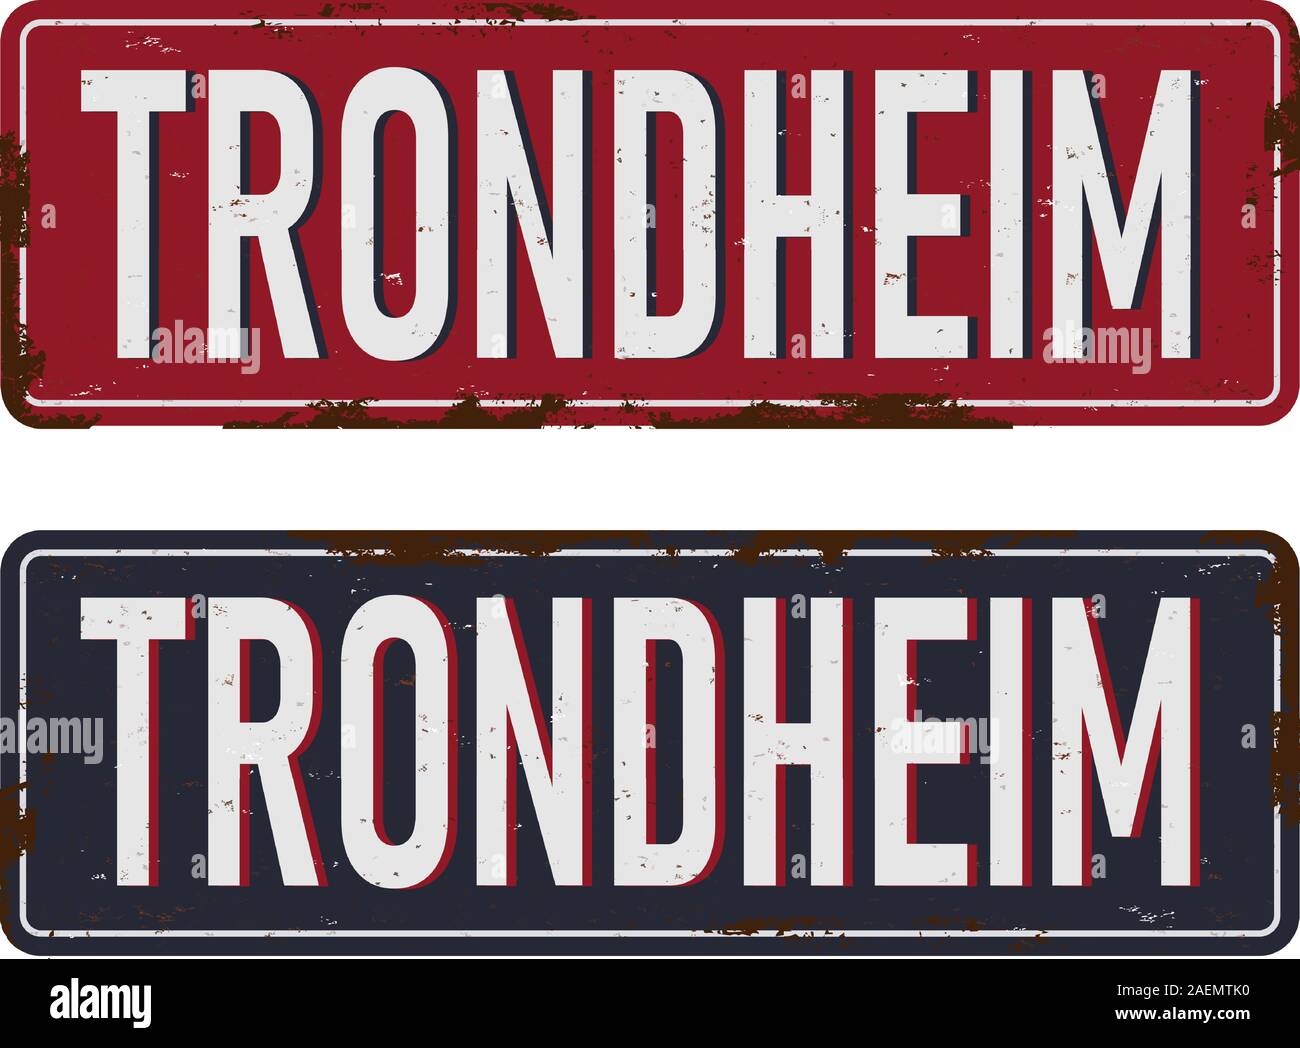 Trondheim road sign isolated on white background. Stock Vector